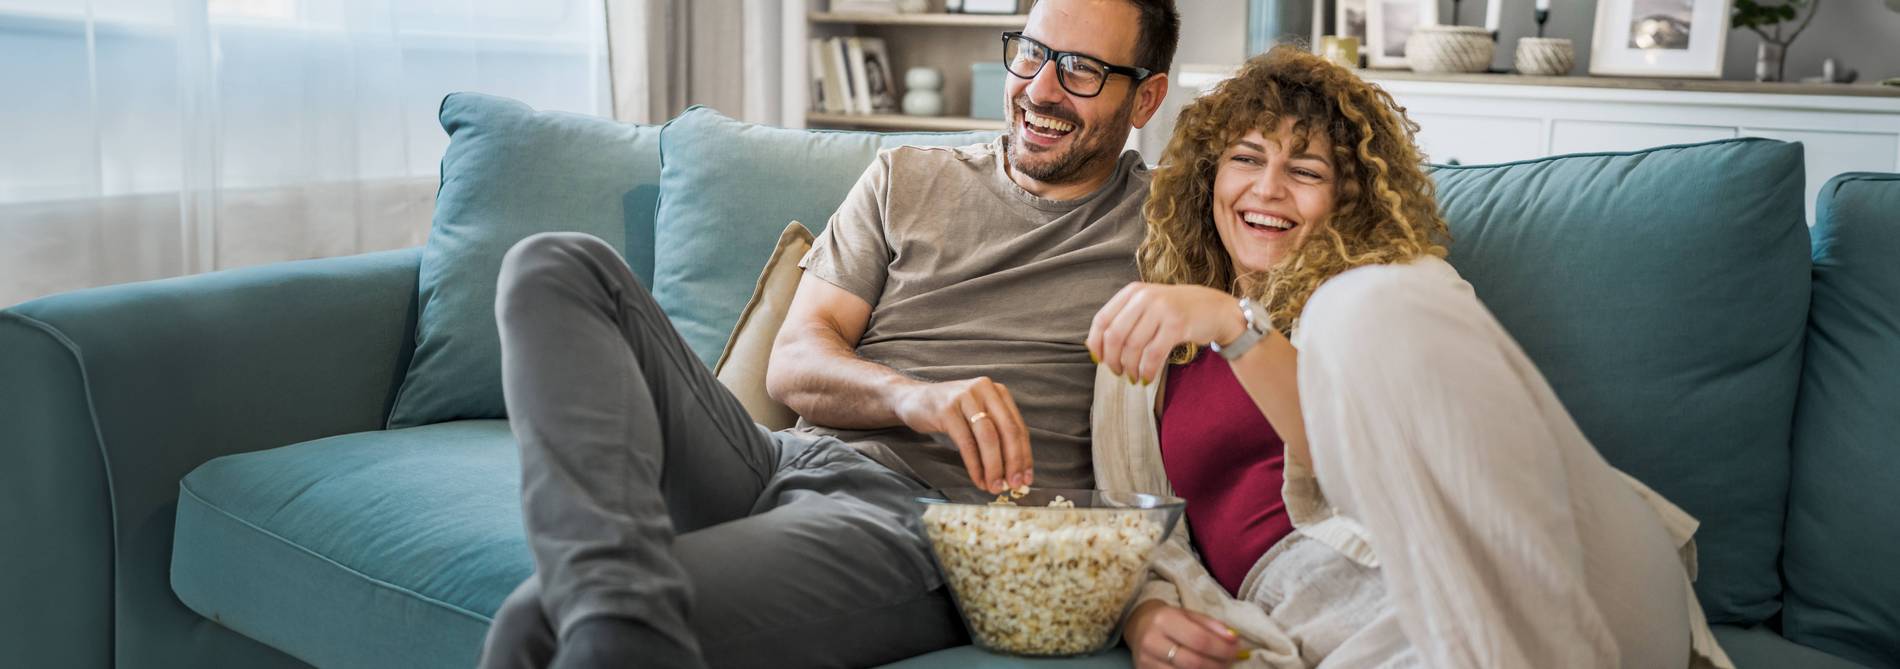 Couple on the sofa with popcorn watching TV